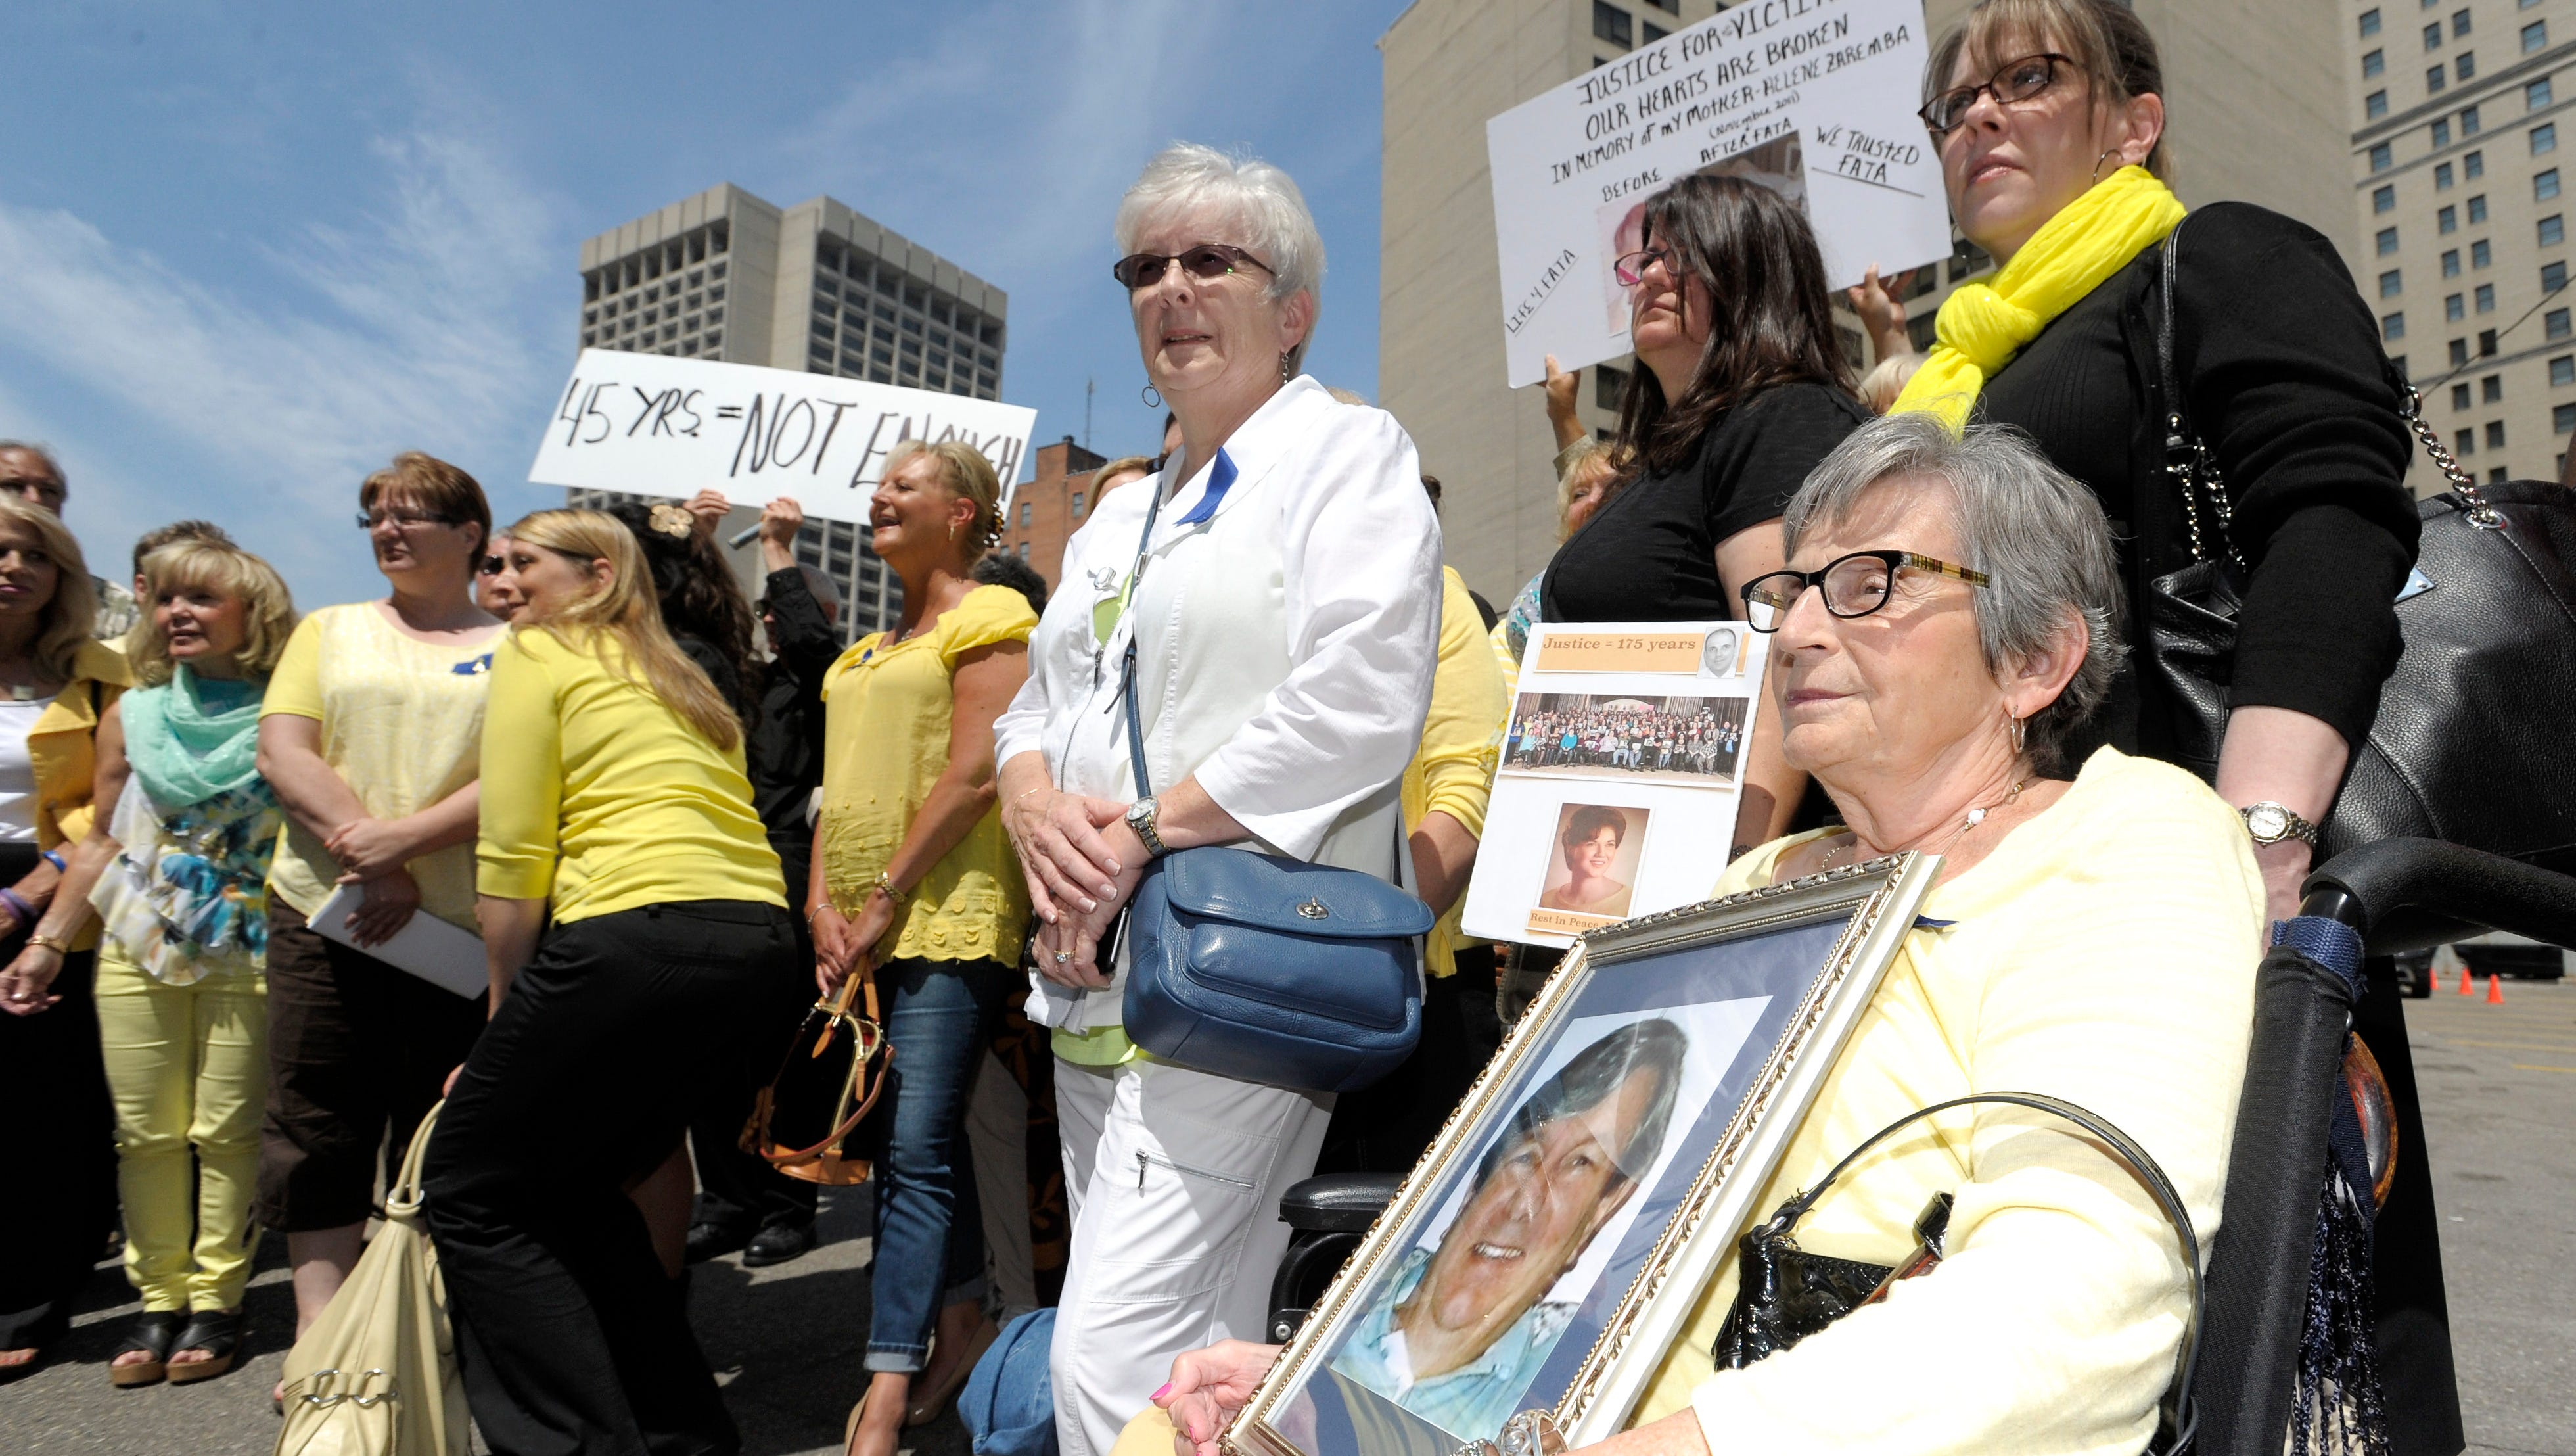 Pat Steinhelper, right, 77, of Waterford, holds a picture of her husband, Jerry Steinhelper, who died due to complications of chemotherapy at the hands of Dr. Fata. She poses for a group shot with other victims and victims' family members after the sentencing.